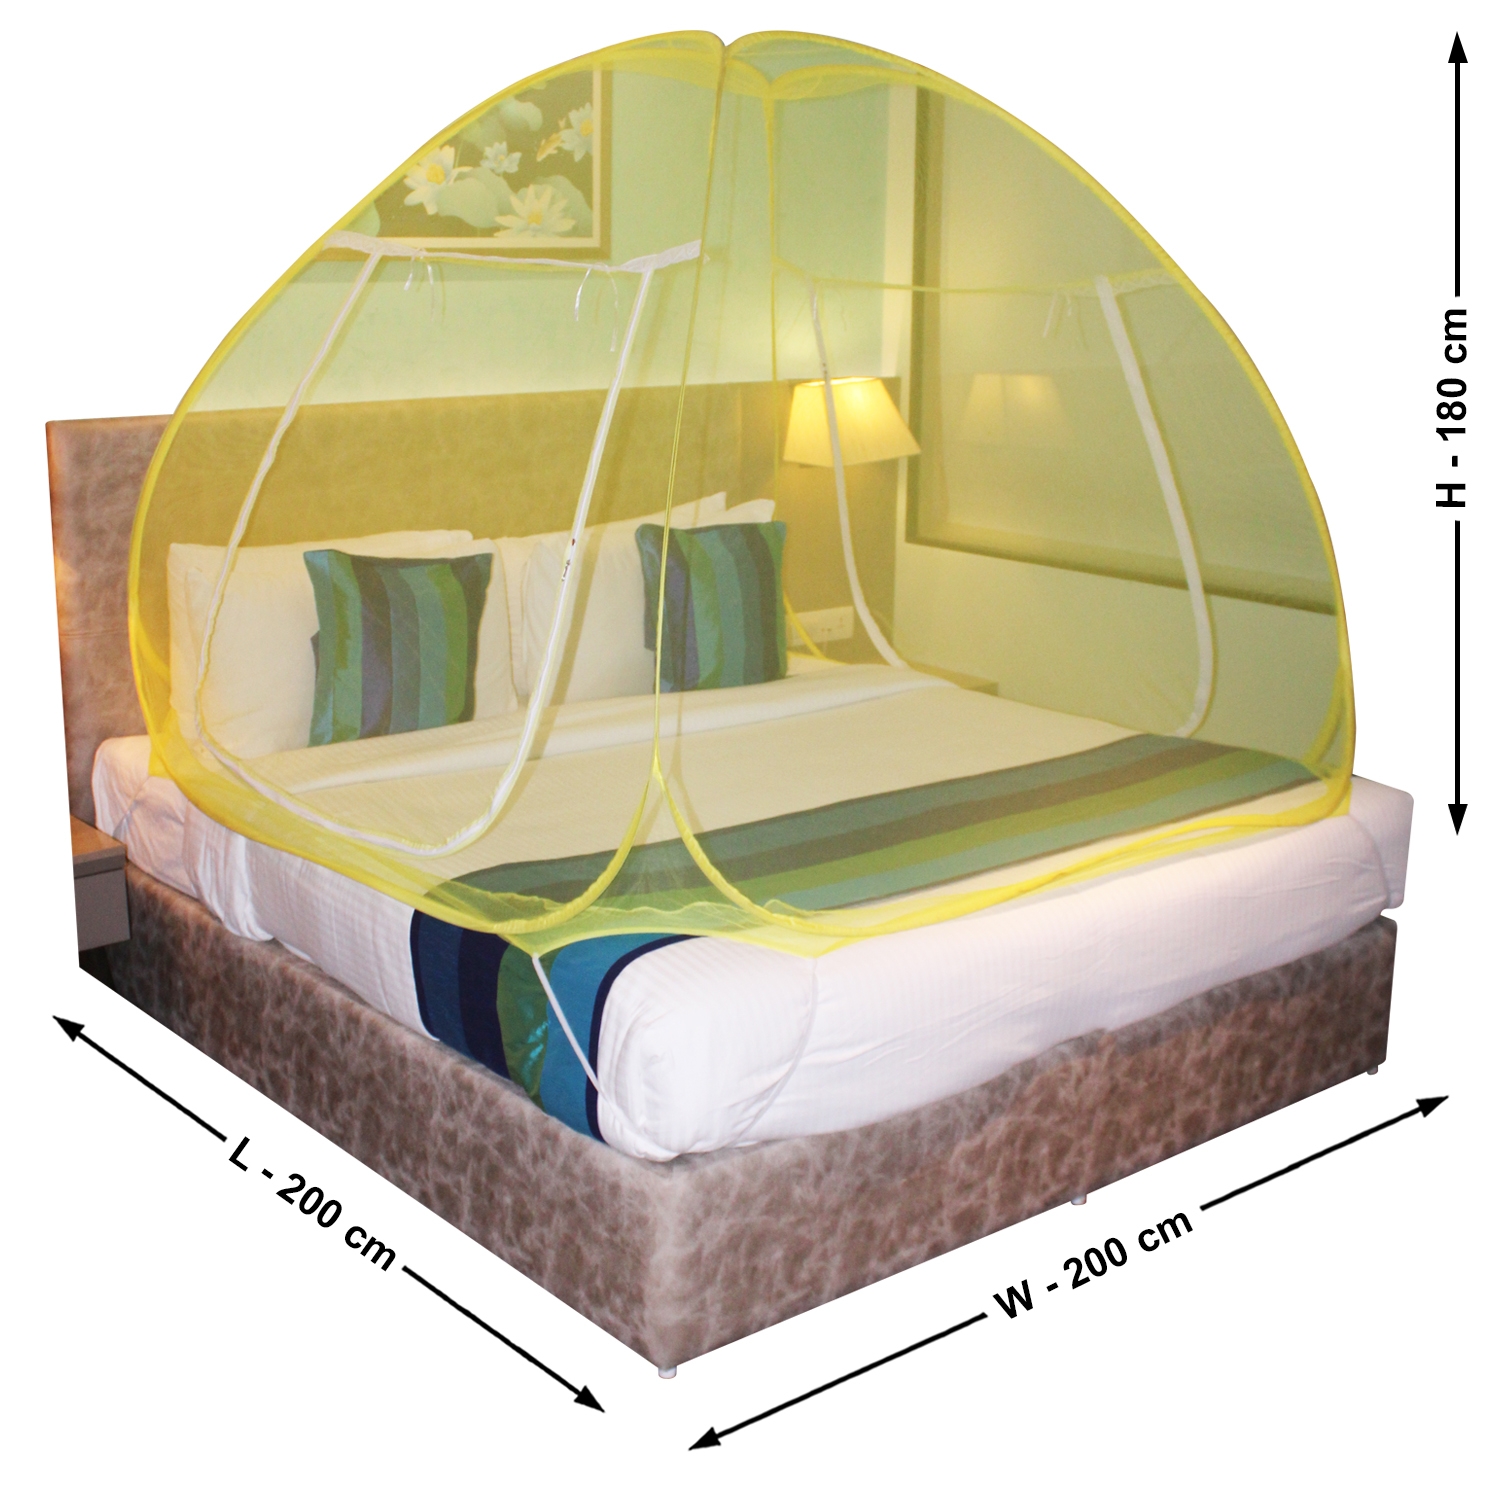  Mosquito Net Yellow And Yellow Foldable Double Bed Net King Size Pack Of 3 